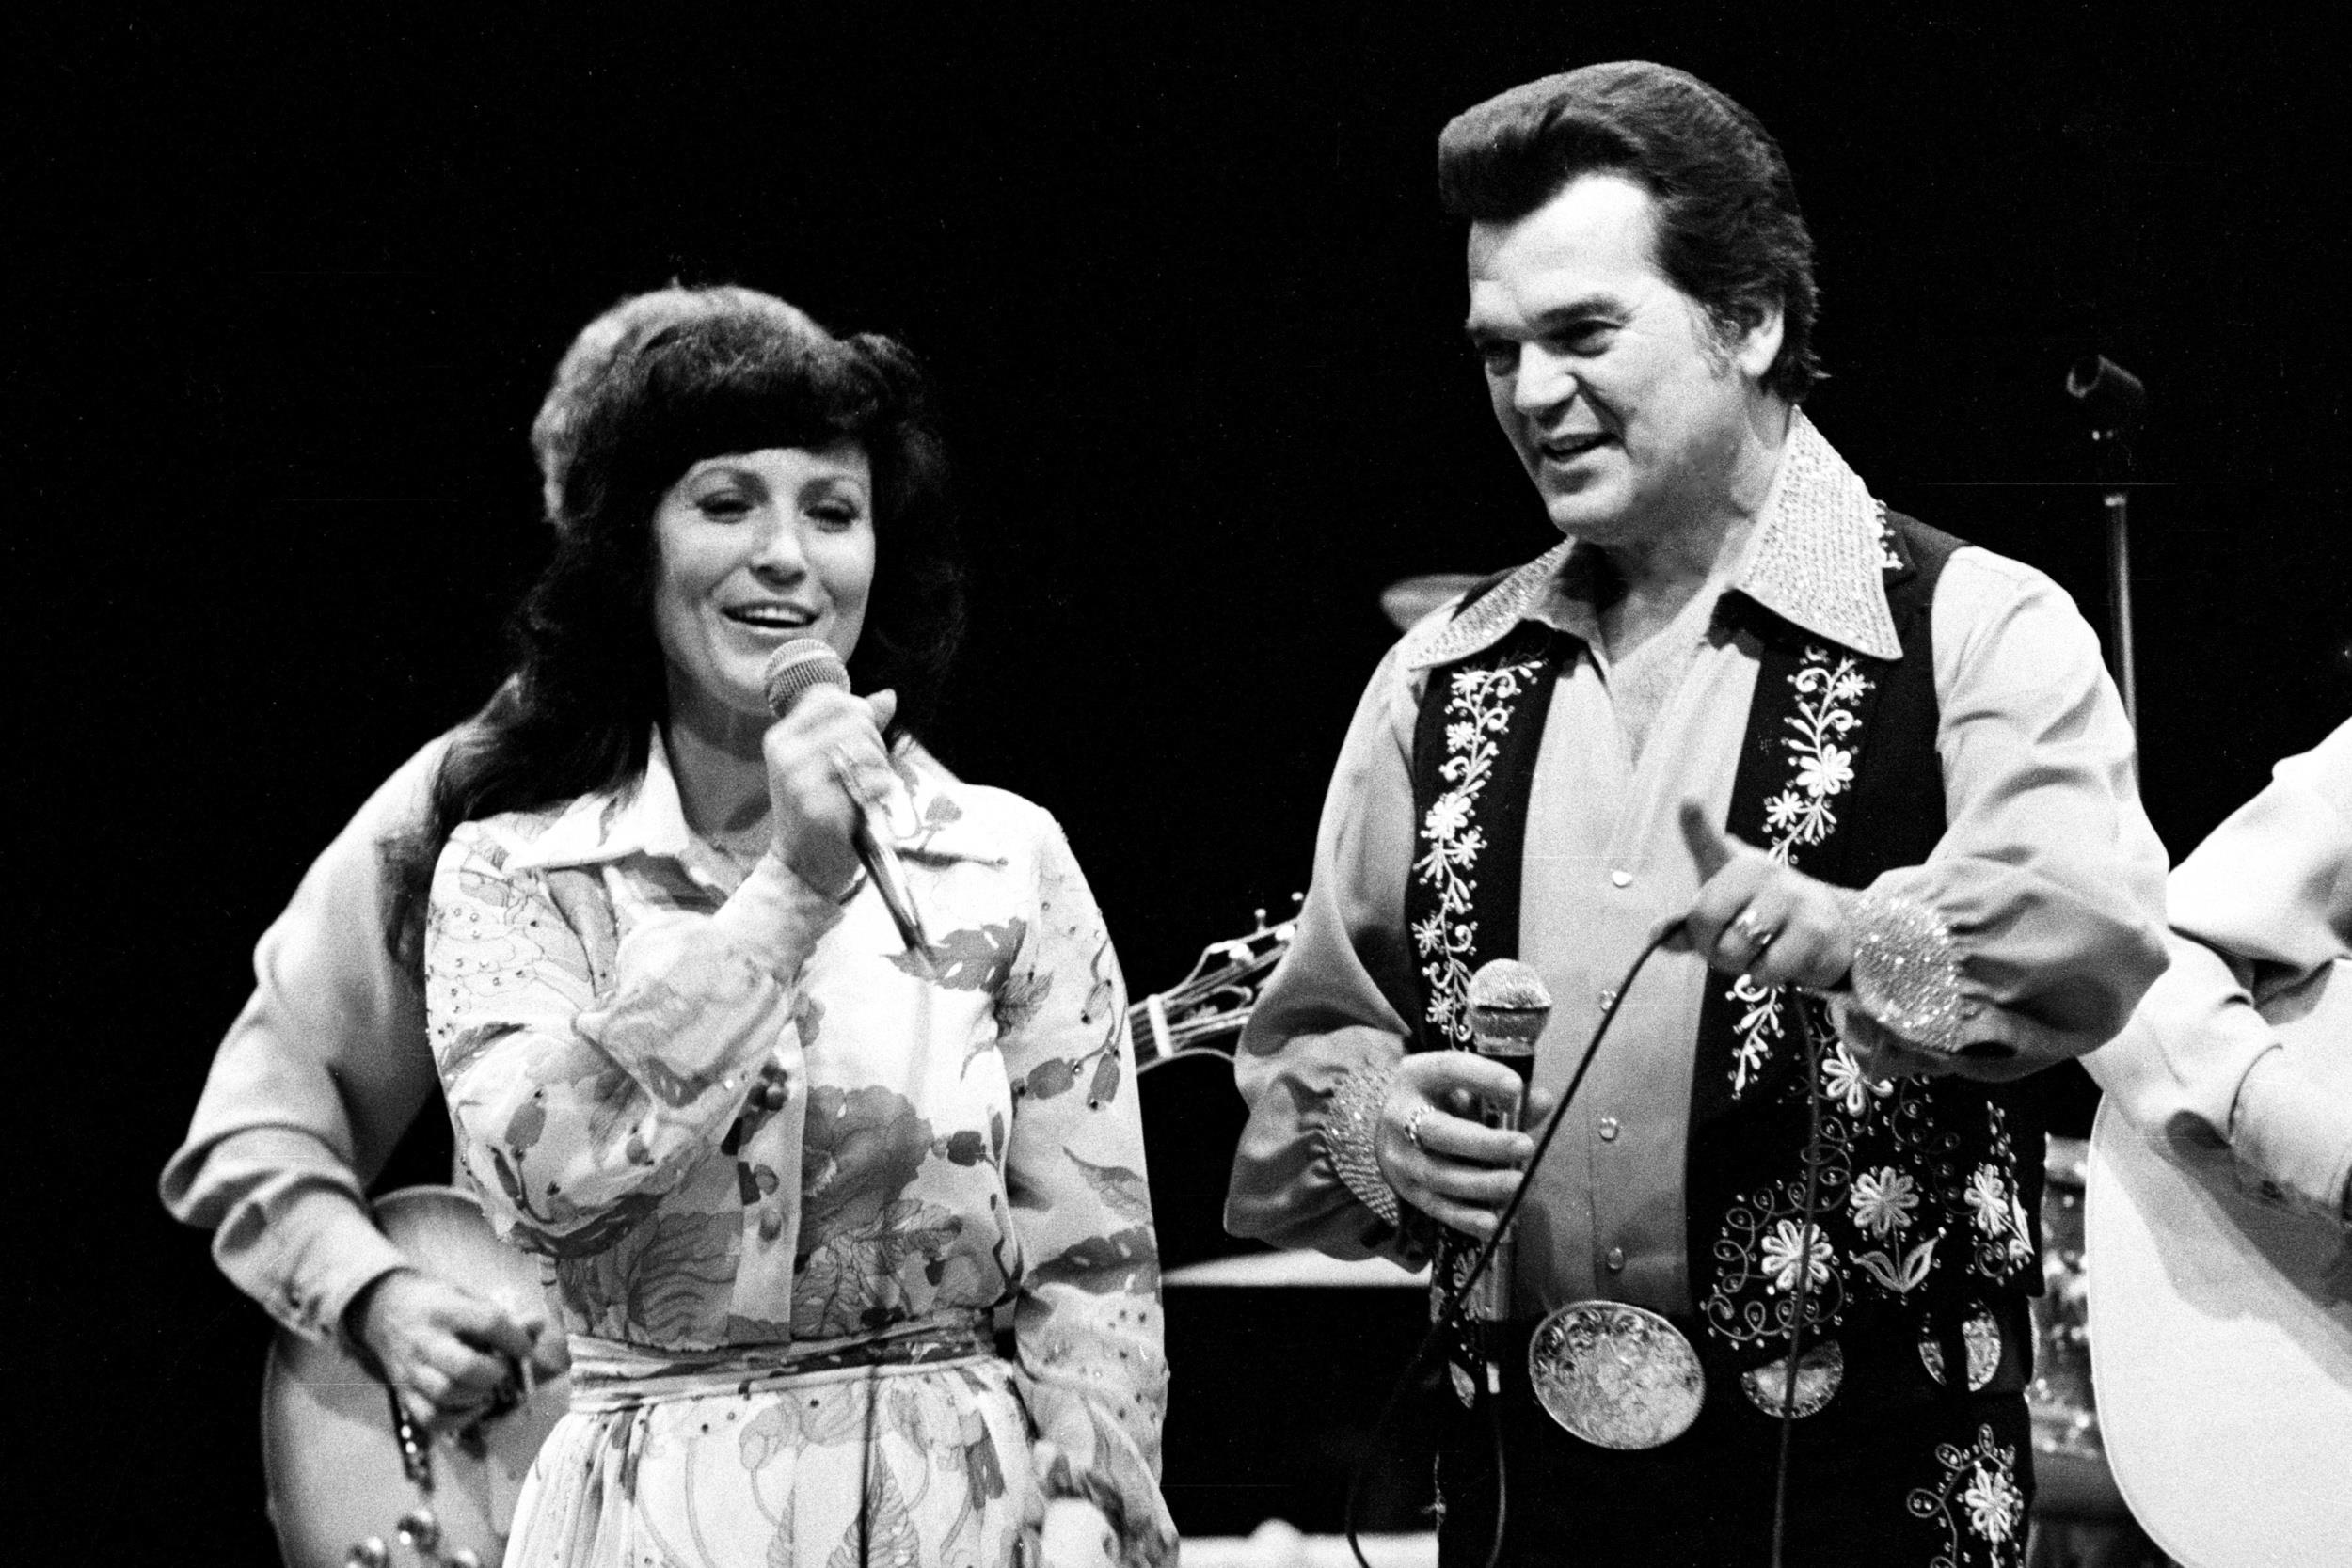 <p>This classic Loretta Lynn and Conway Twitty duet marked the duo's third #1 on the Billboard charts and was the title track of their 1973 album. With its characteristic country twang, Cajun influences, and upbeat vocals from these two country legends, "Louisiana Woman, Mississippi Man" remains a favorite among fans of traditional country. </p><p>You may also like: <a href='https://www.yardbarker.com/entertainment/articles/the_20_best_bad_movies_of_all_time/s1__30206336'>The 20 best bad movies of all time</a></p>